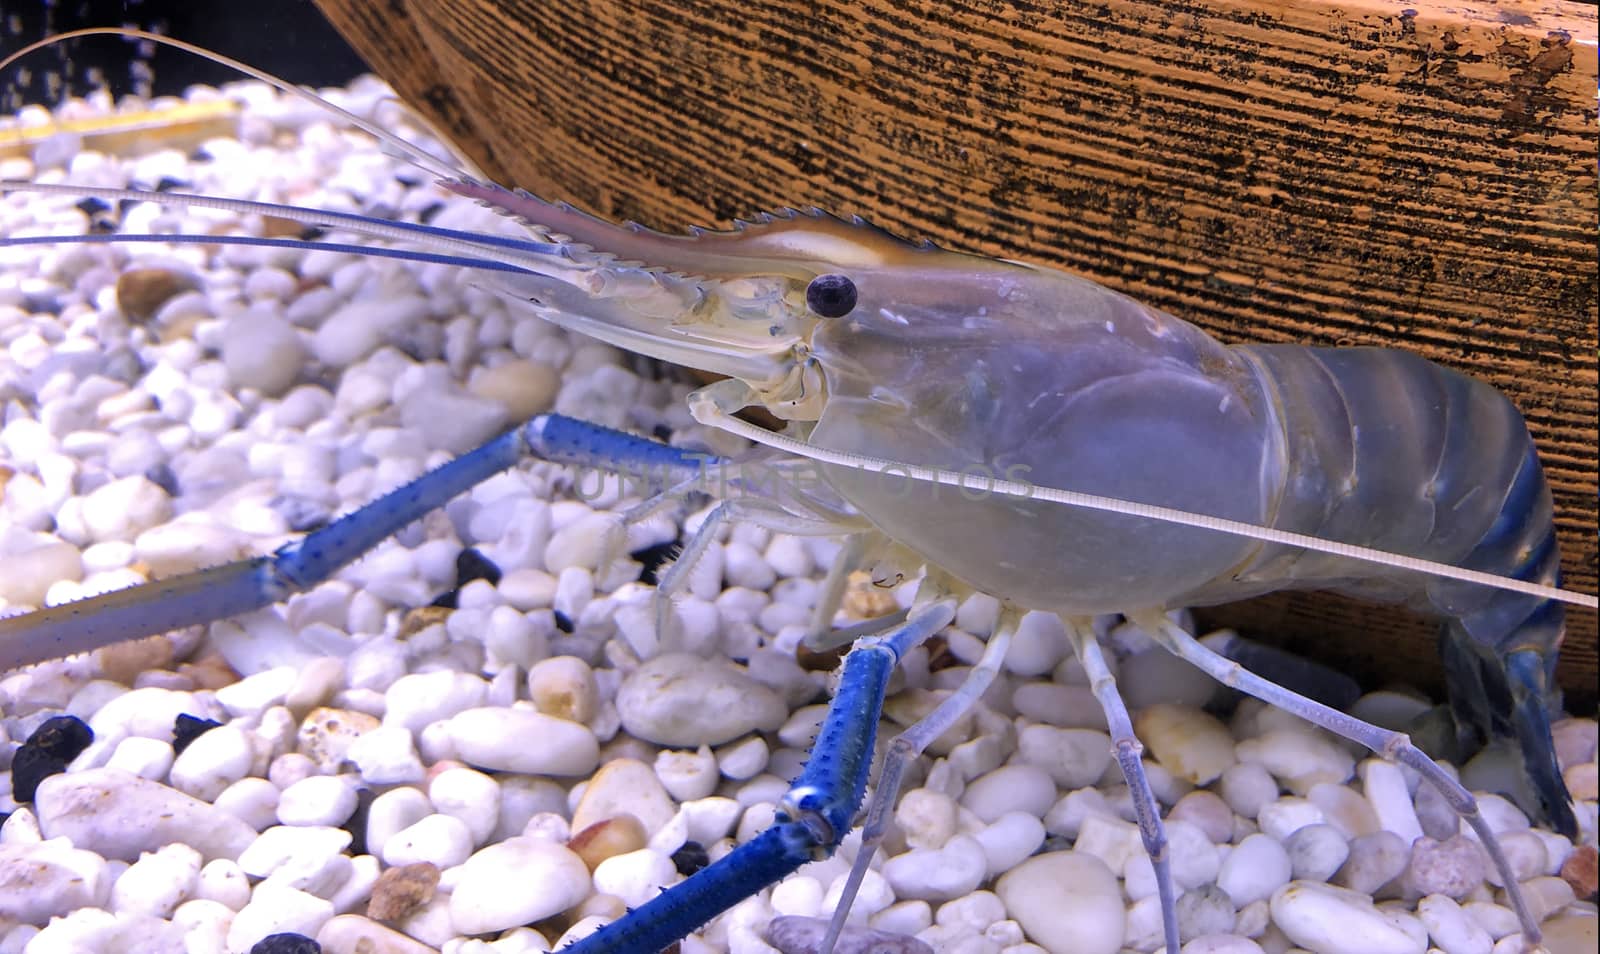 Giant river prawn or giant freshwater prawn, is a commercially important species of palaemonid freshwater prawn.